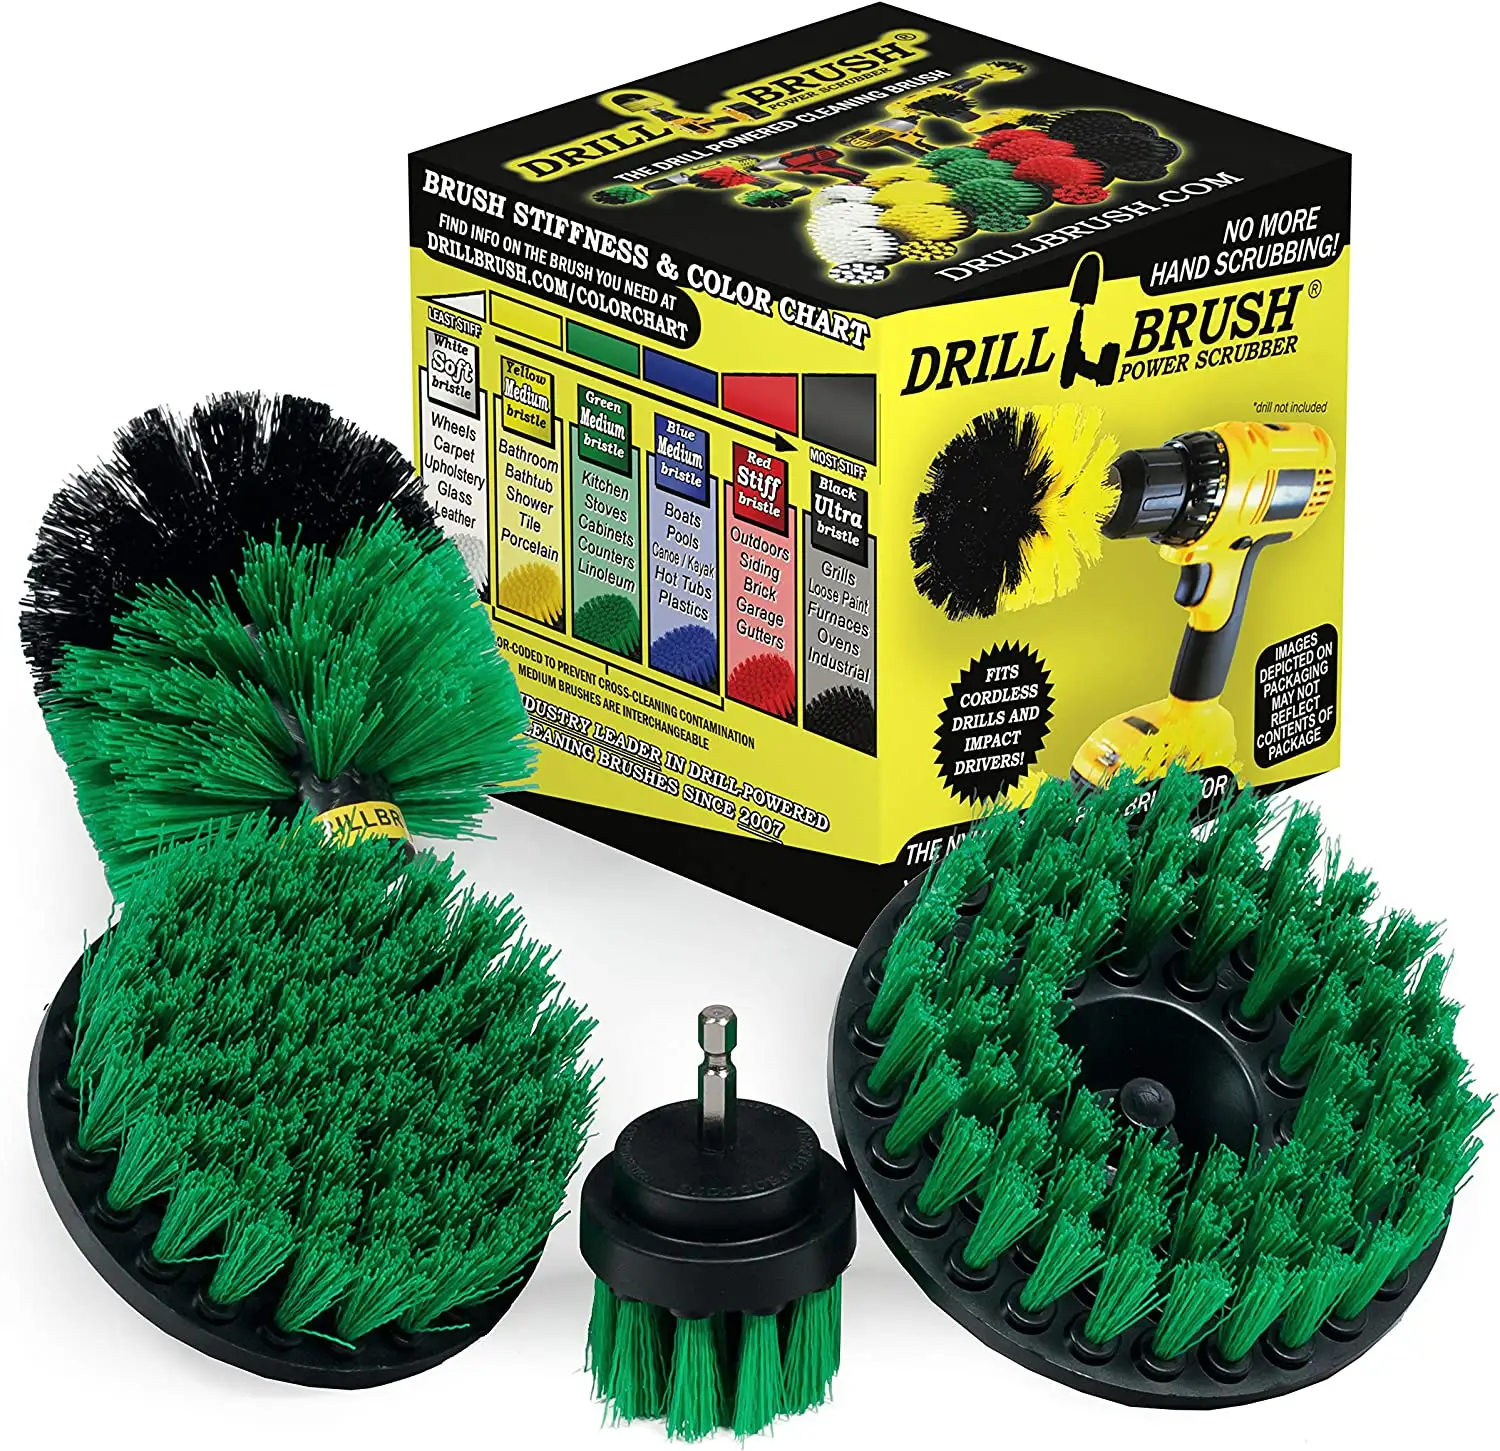 PEXCRAFT 4pcs Green Scrubber Drill Brush Set Cleaning with Long Attachement